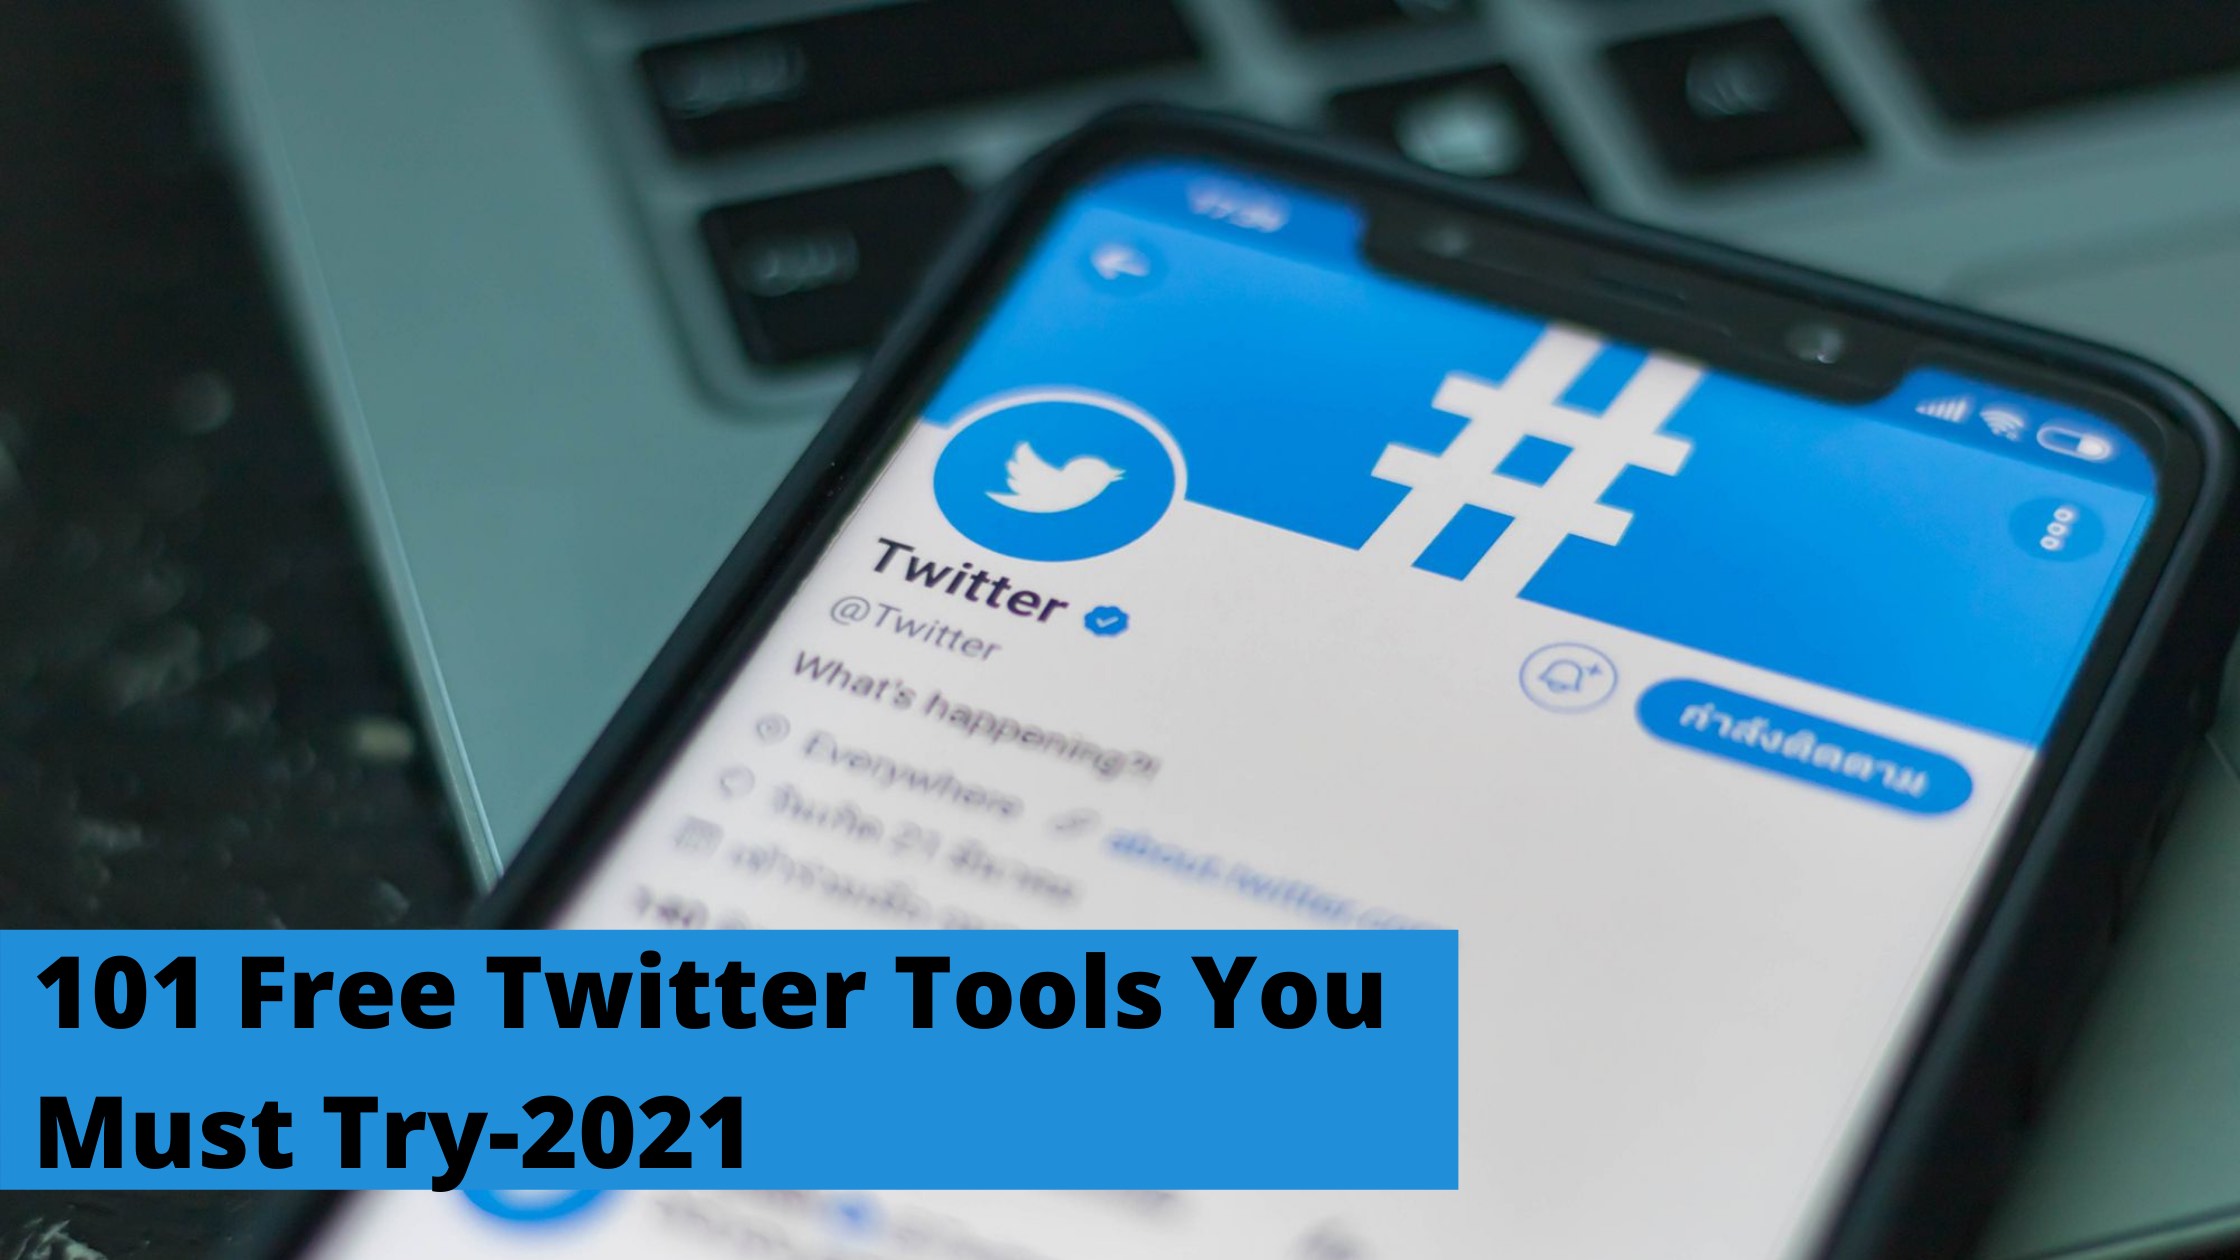 101 Free Twitter Tools You Must Try-2021